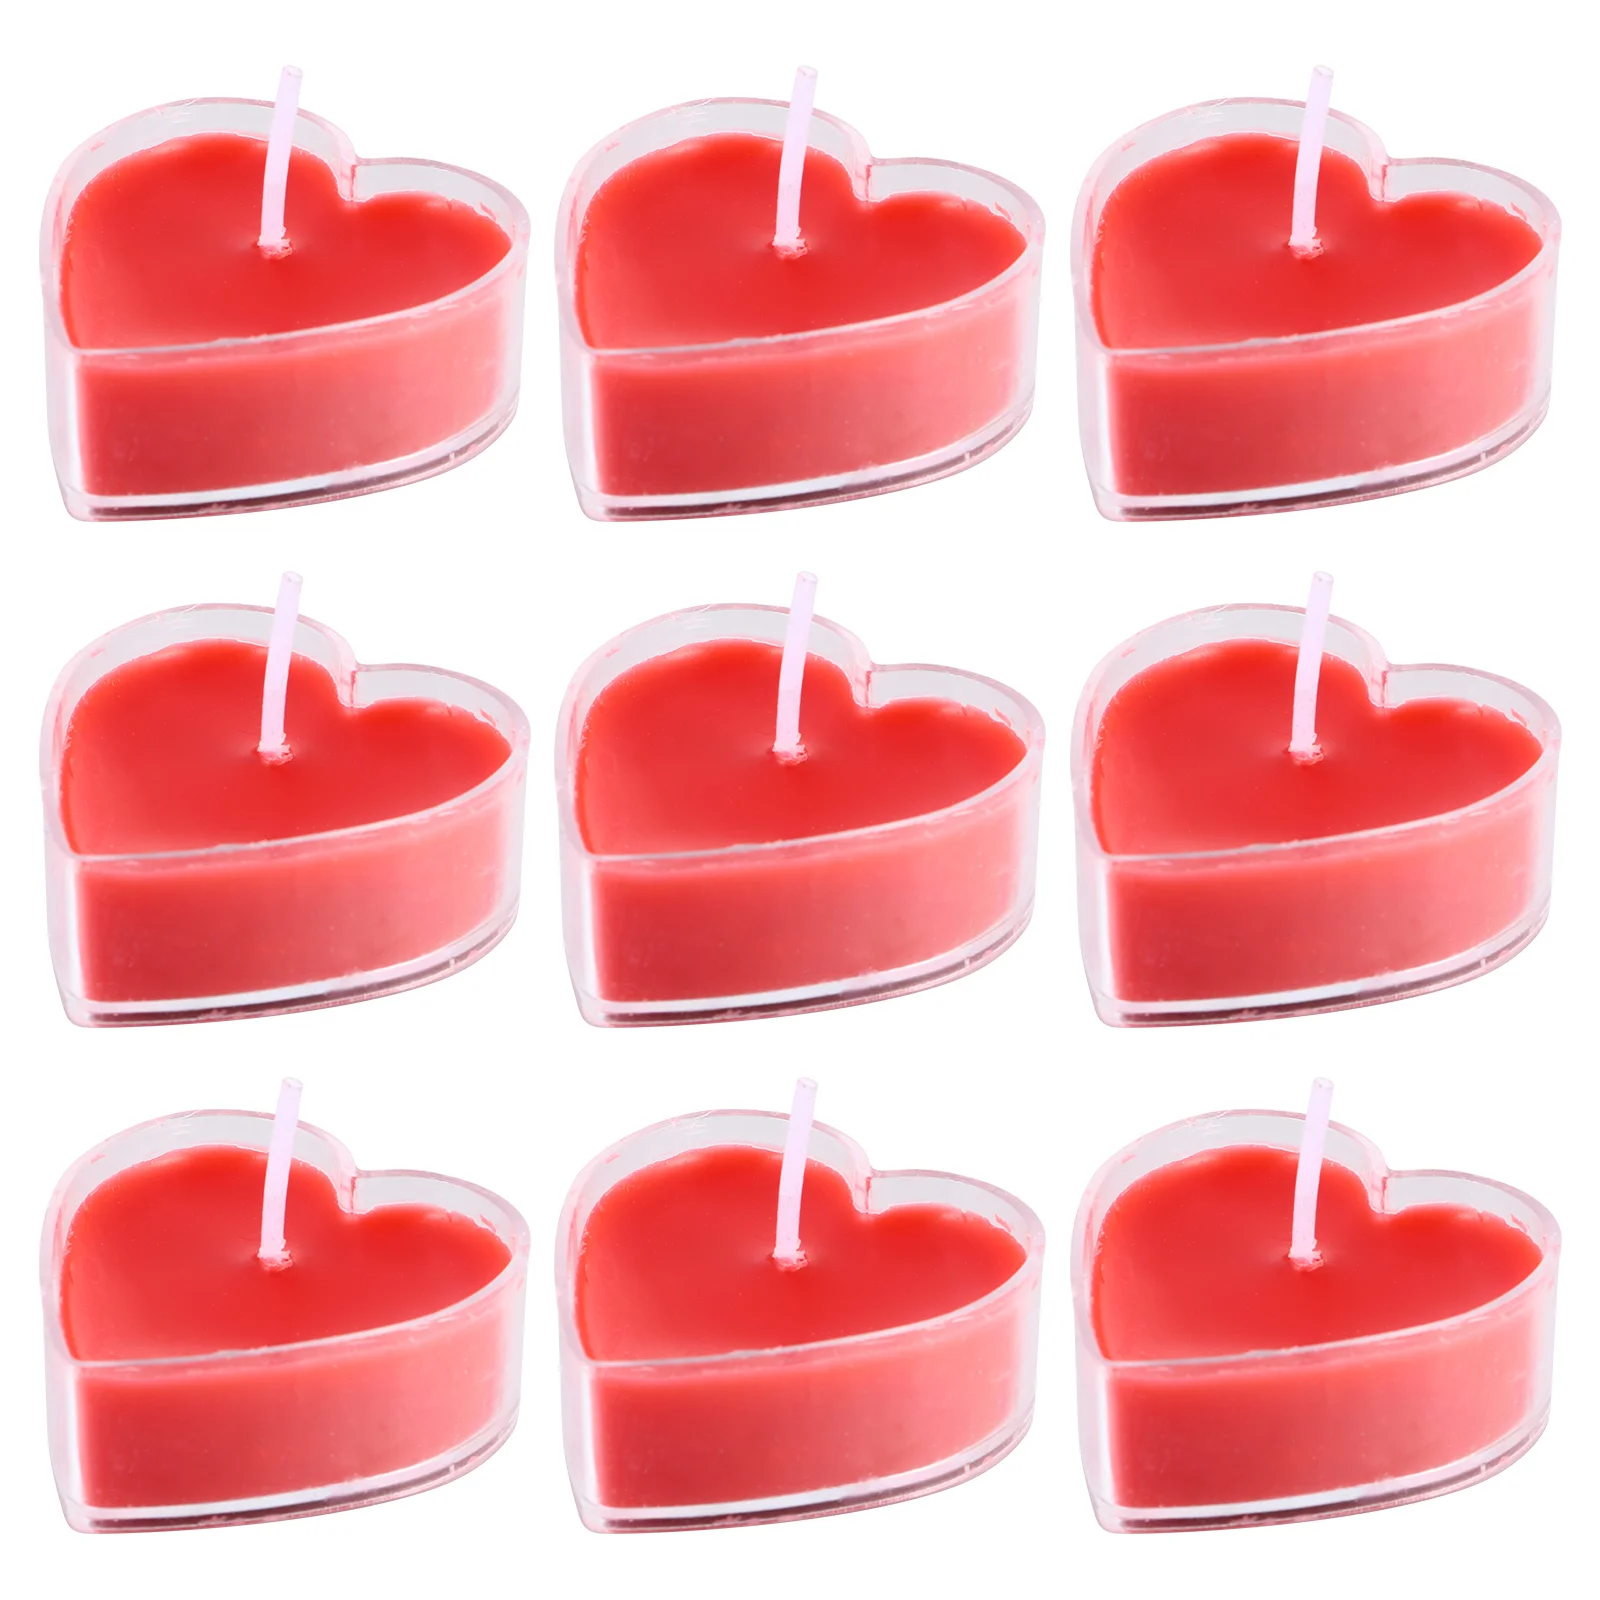 

Heart Romantic Tealight Love Proposal Wedding Red Scented Decorative Marriage Lights Tea Smokeless Shaped Favors Style